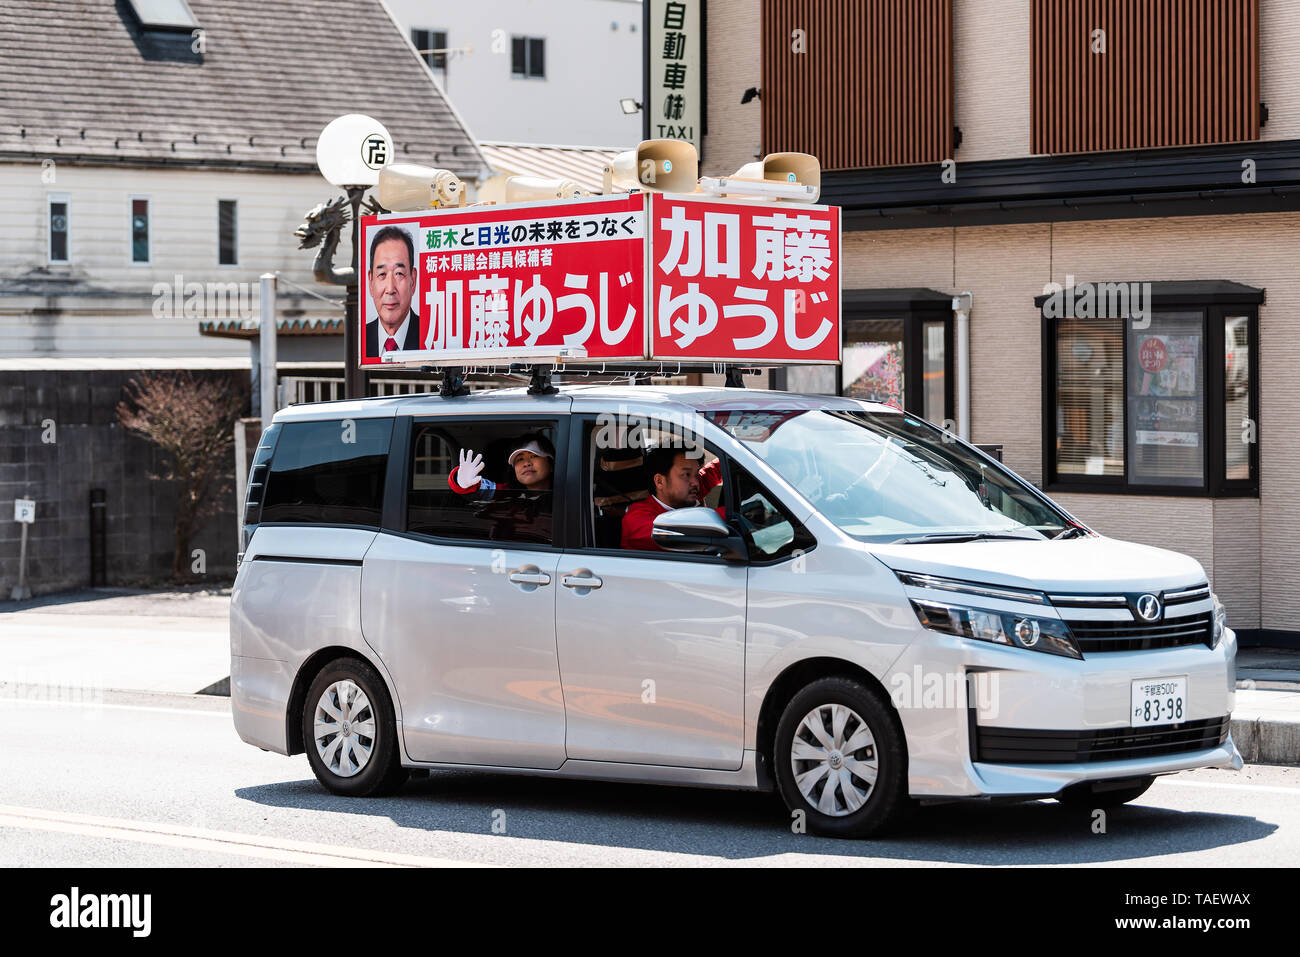 Nikko, Japan - April 4, 2019: Election campaign car with sign in Tochigi prefecture on street road by house building Stock Photo